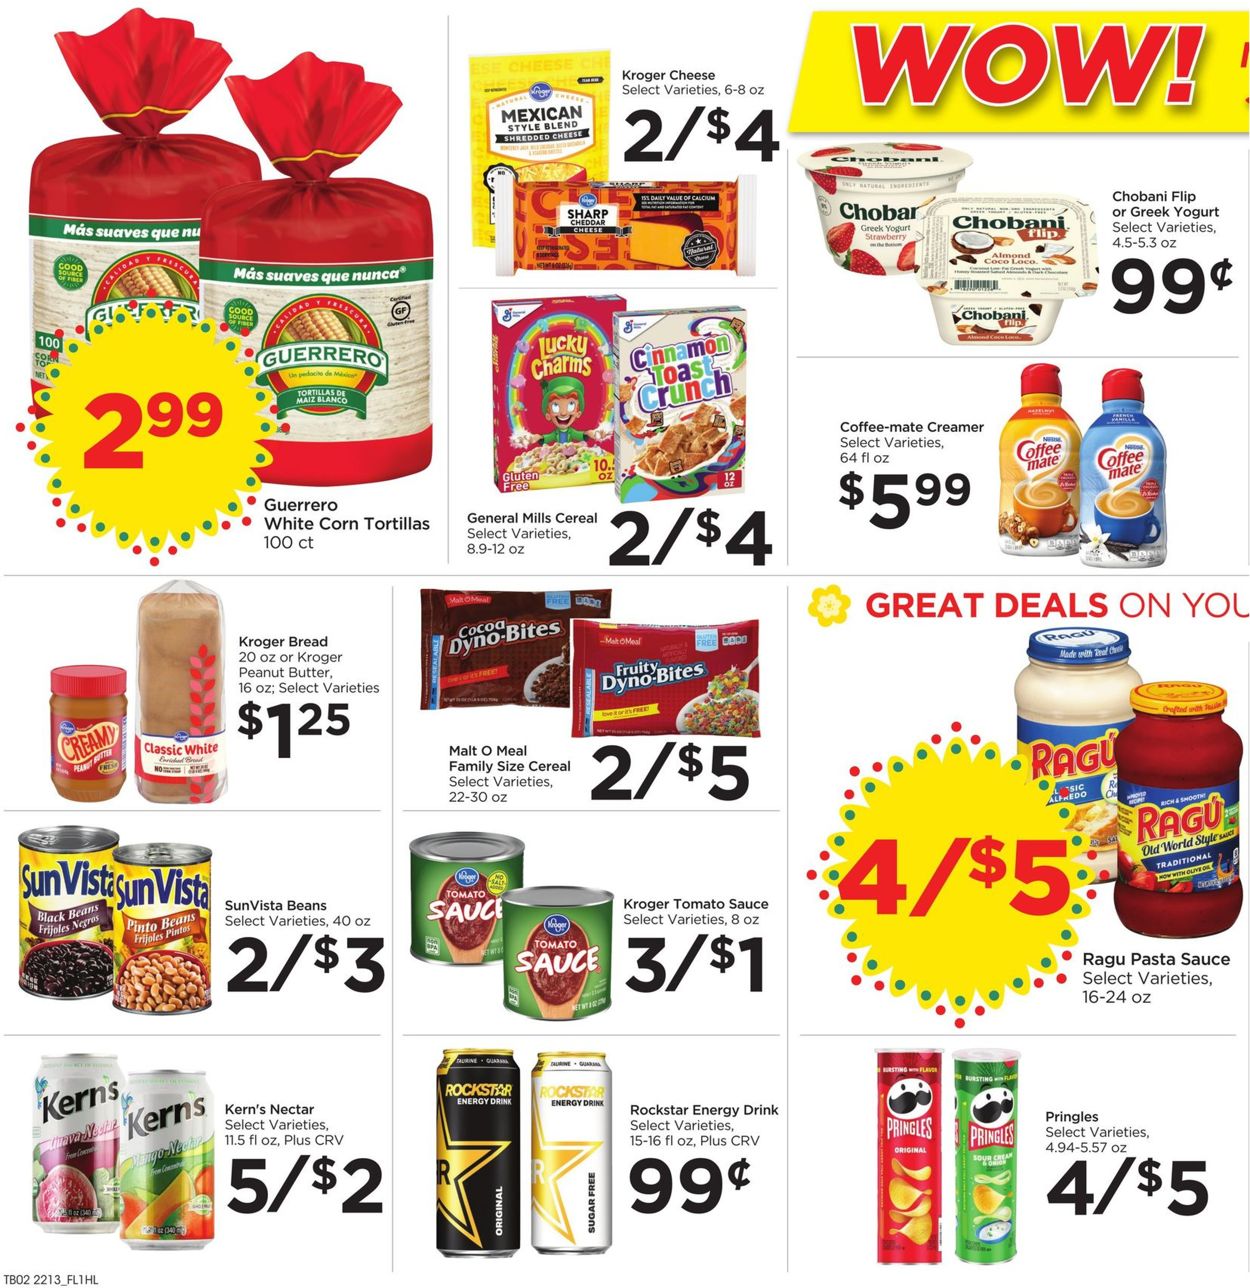 Catalogue Food 4 Less from 04/27/2022